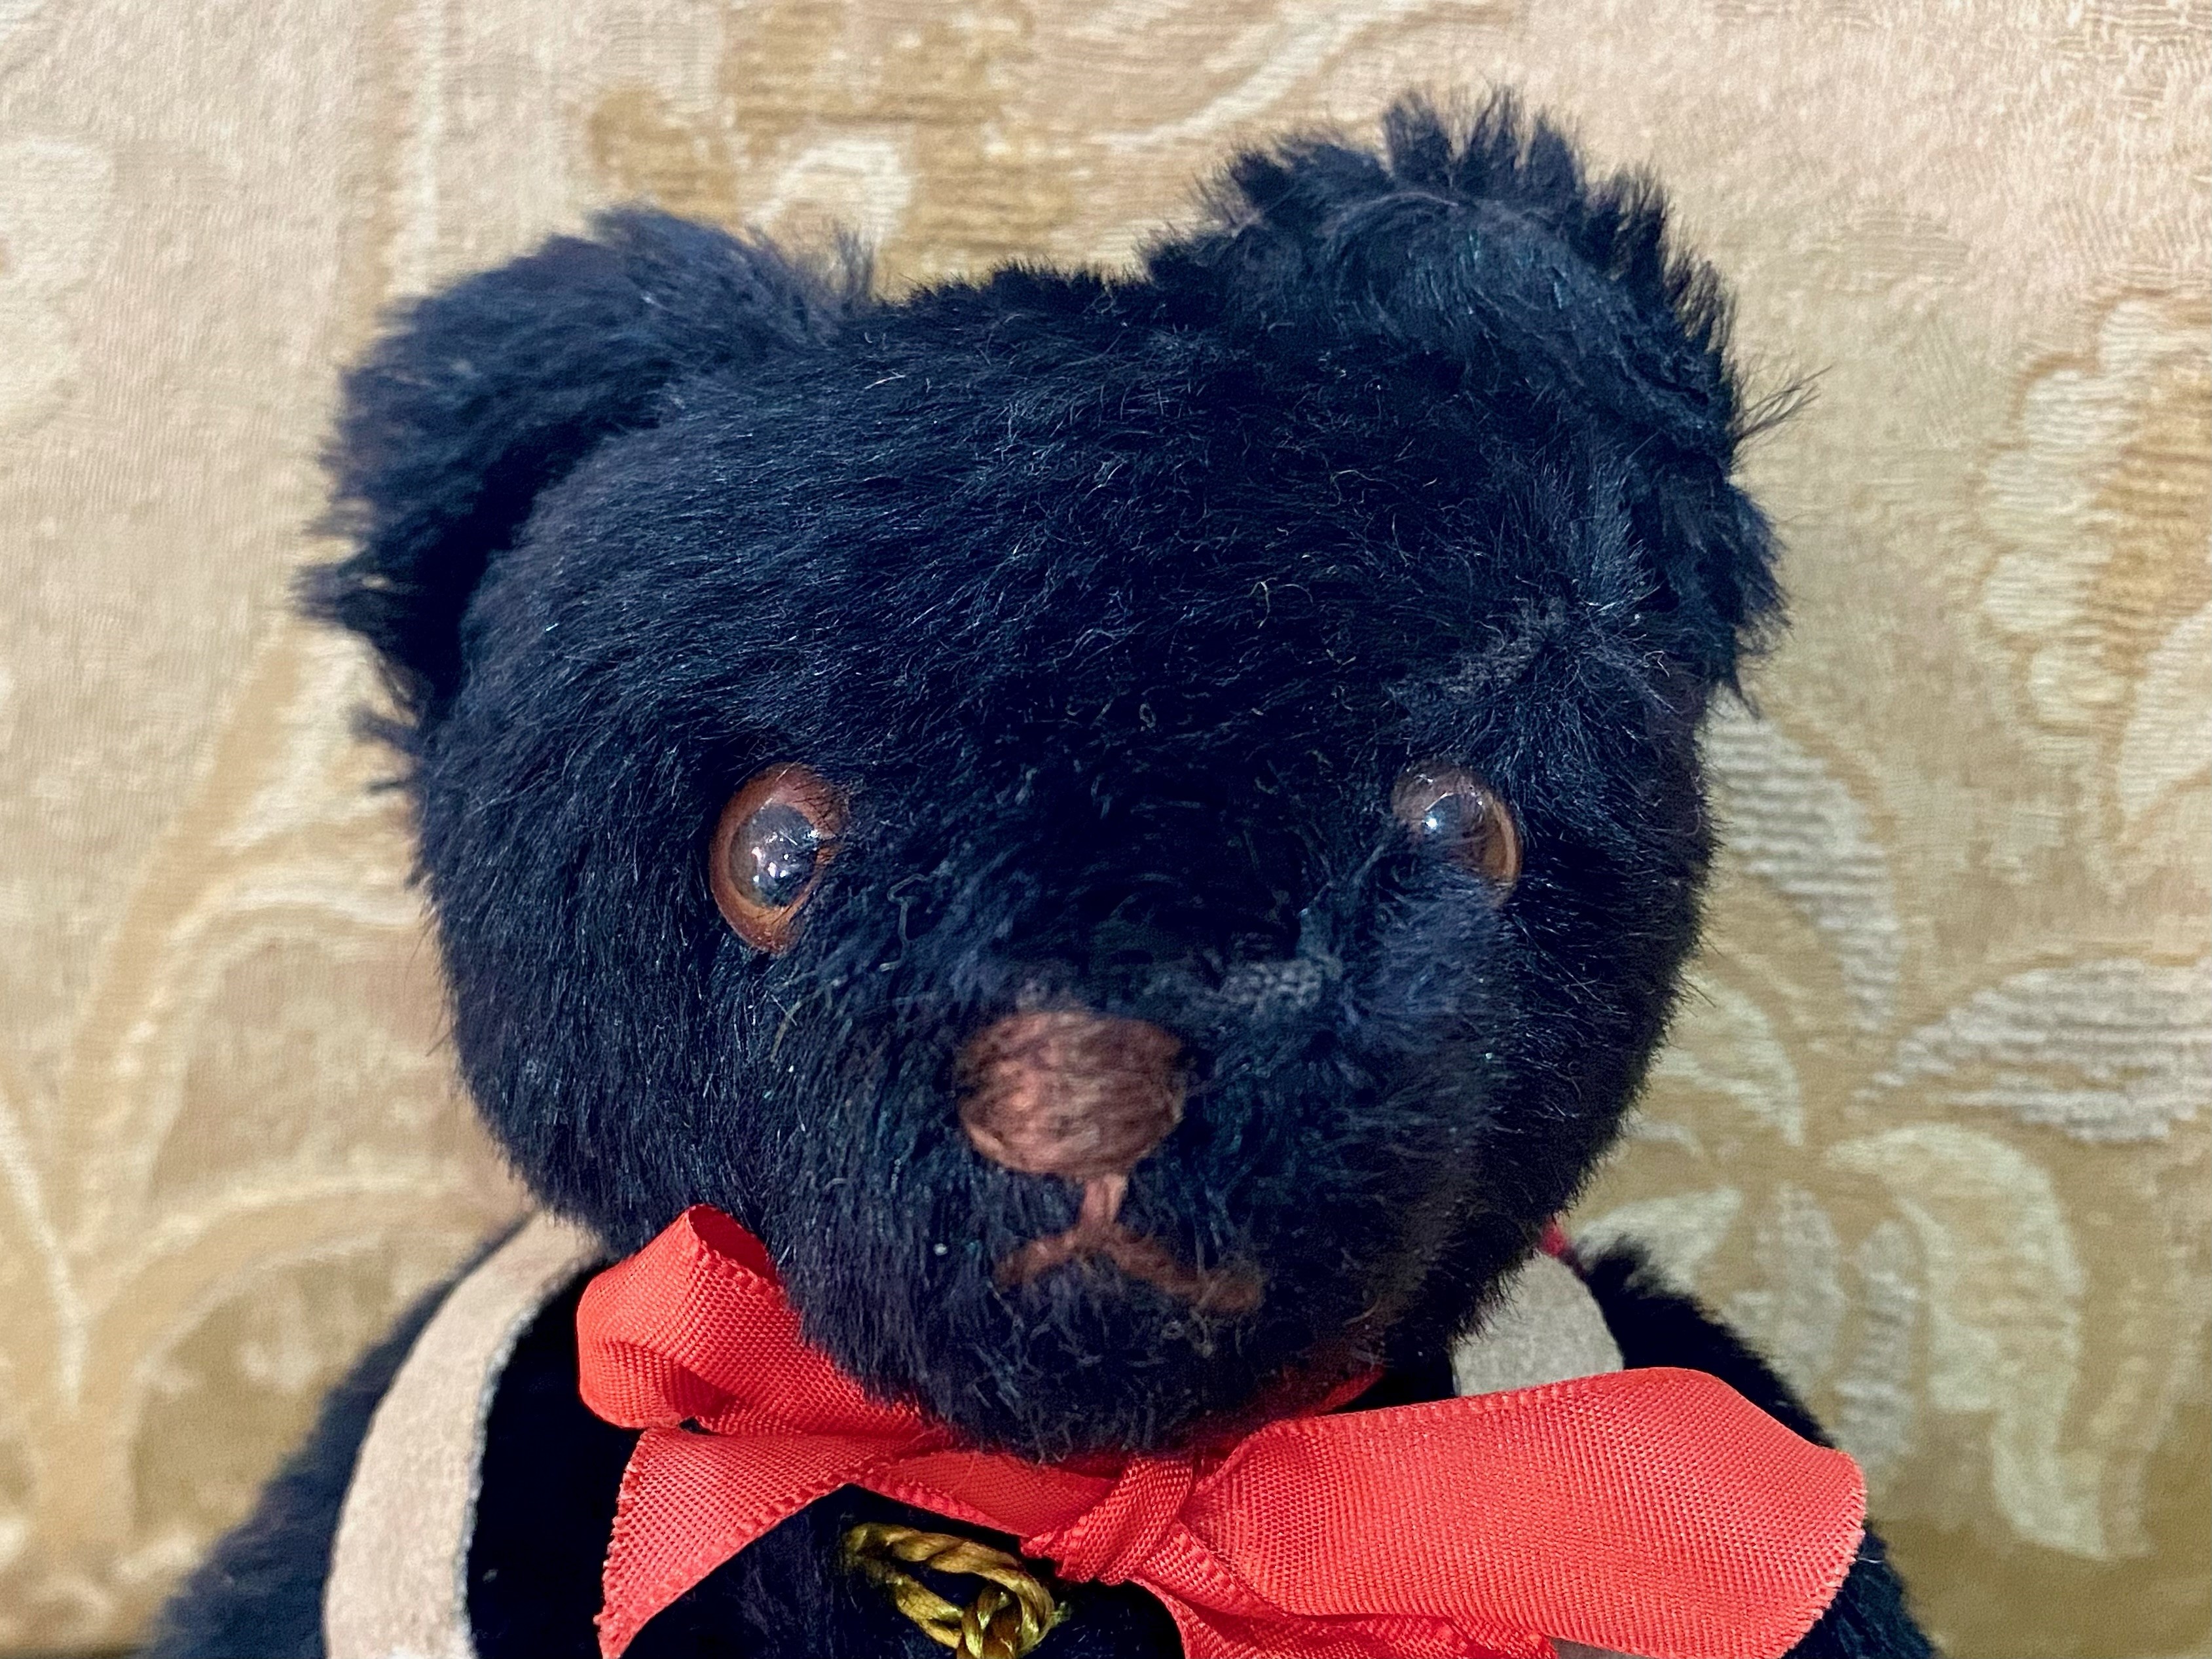 Harmann Original Teddy Bear, black plush fabric, complete with a back pack, moveable limbs, - Image 2 of 2